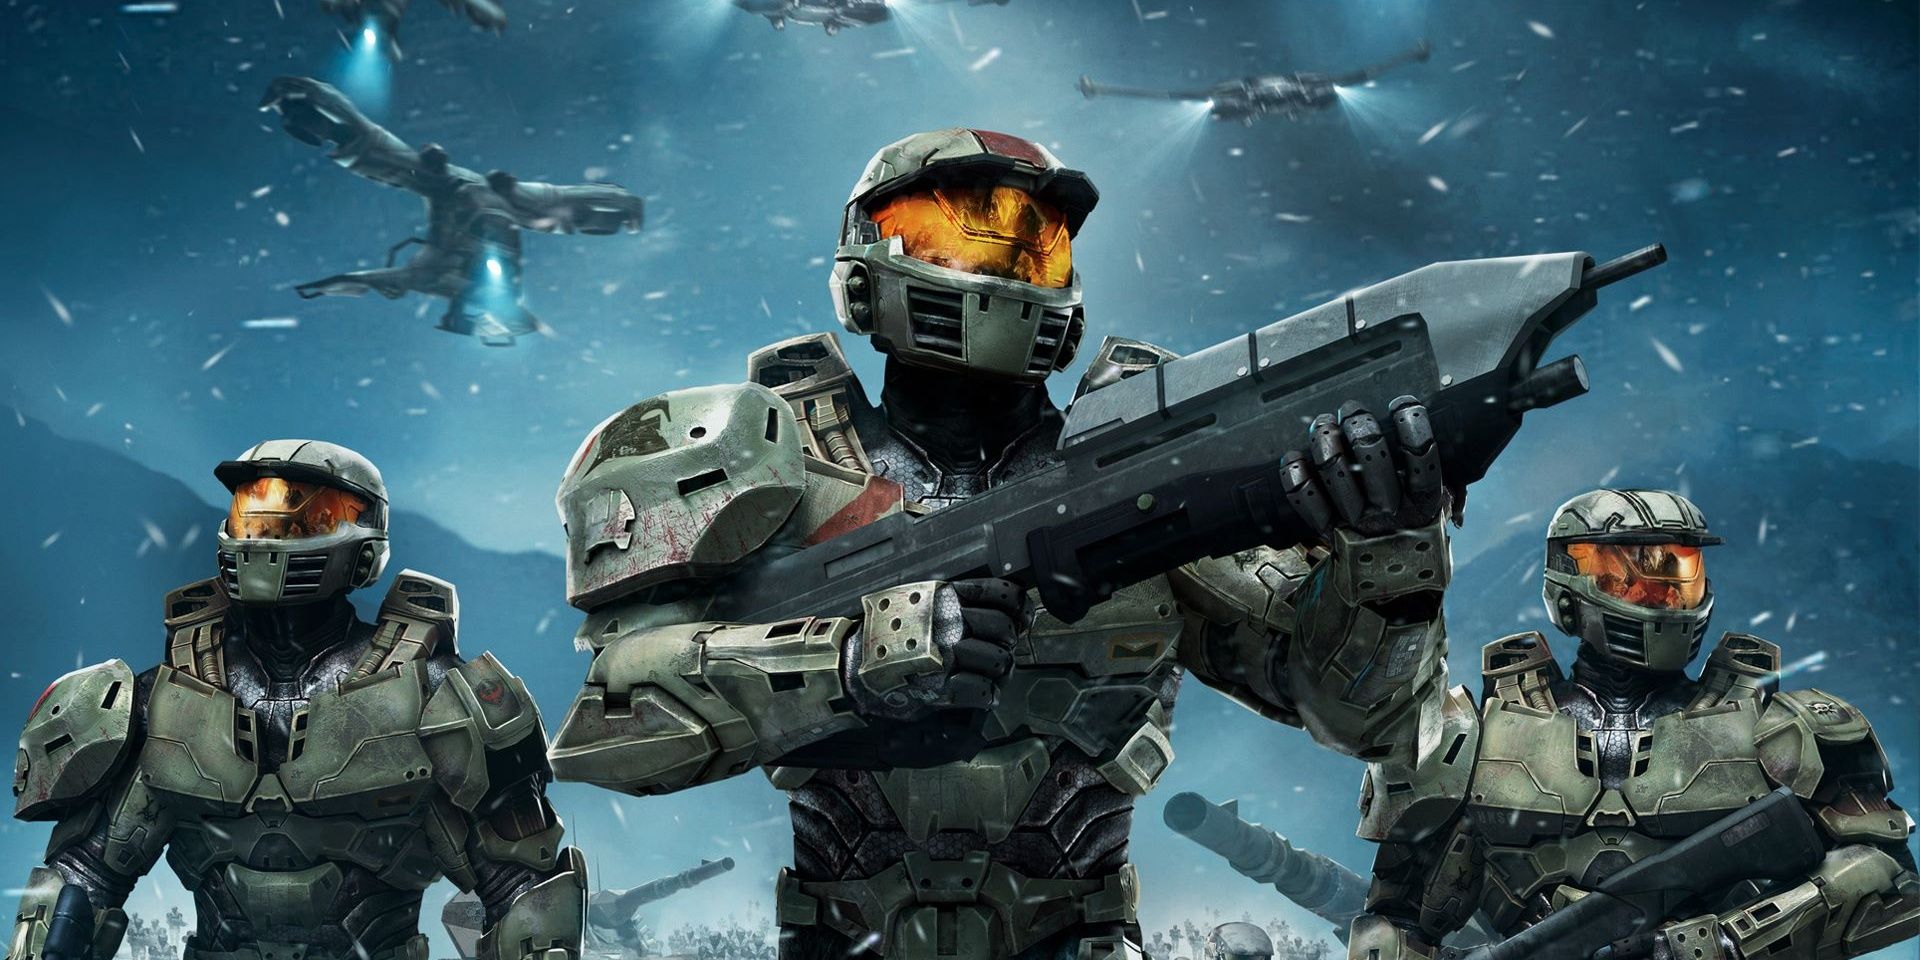 What To Expect From Showtime’s Halo TV Show